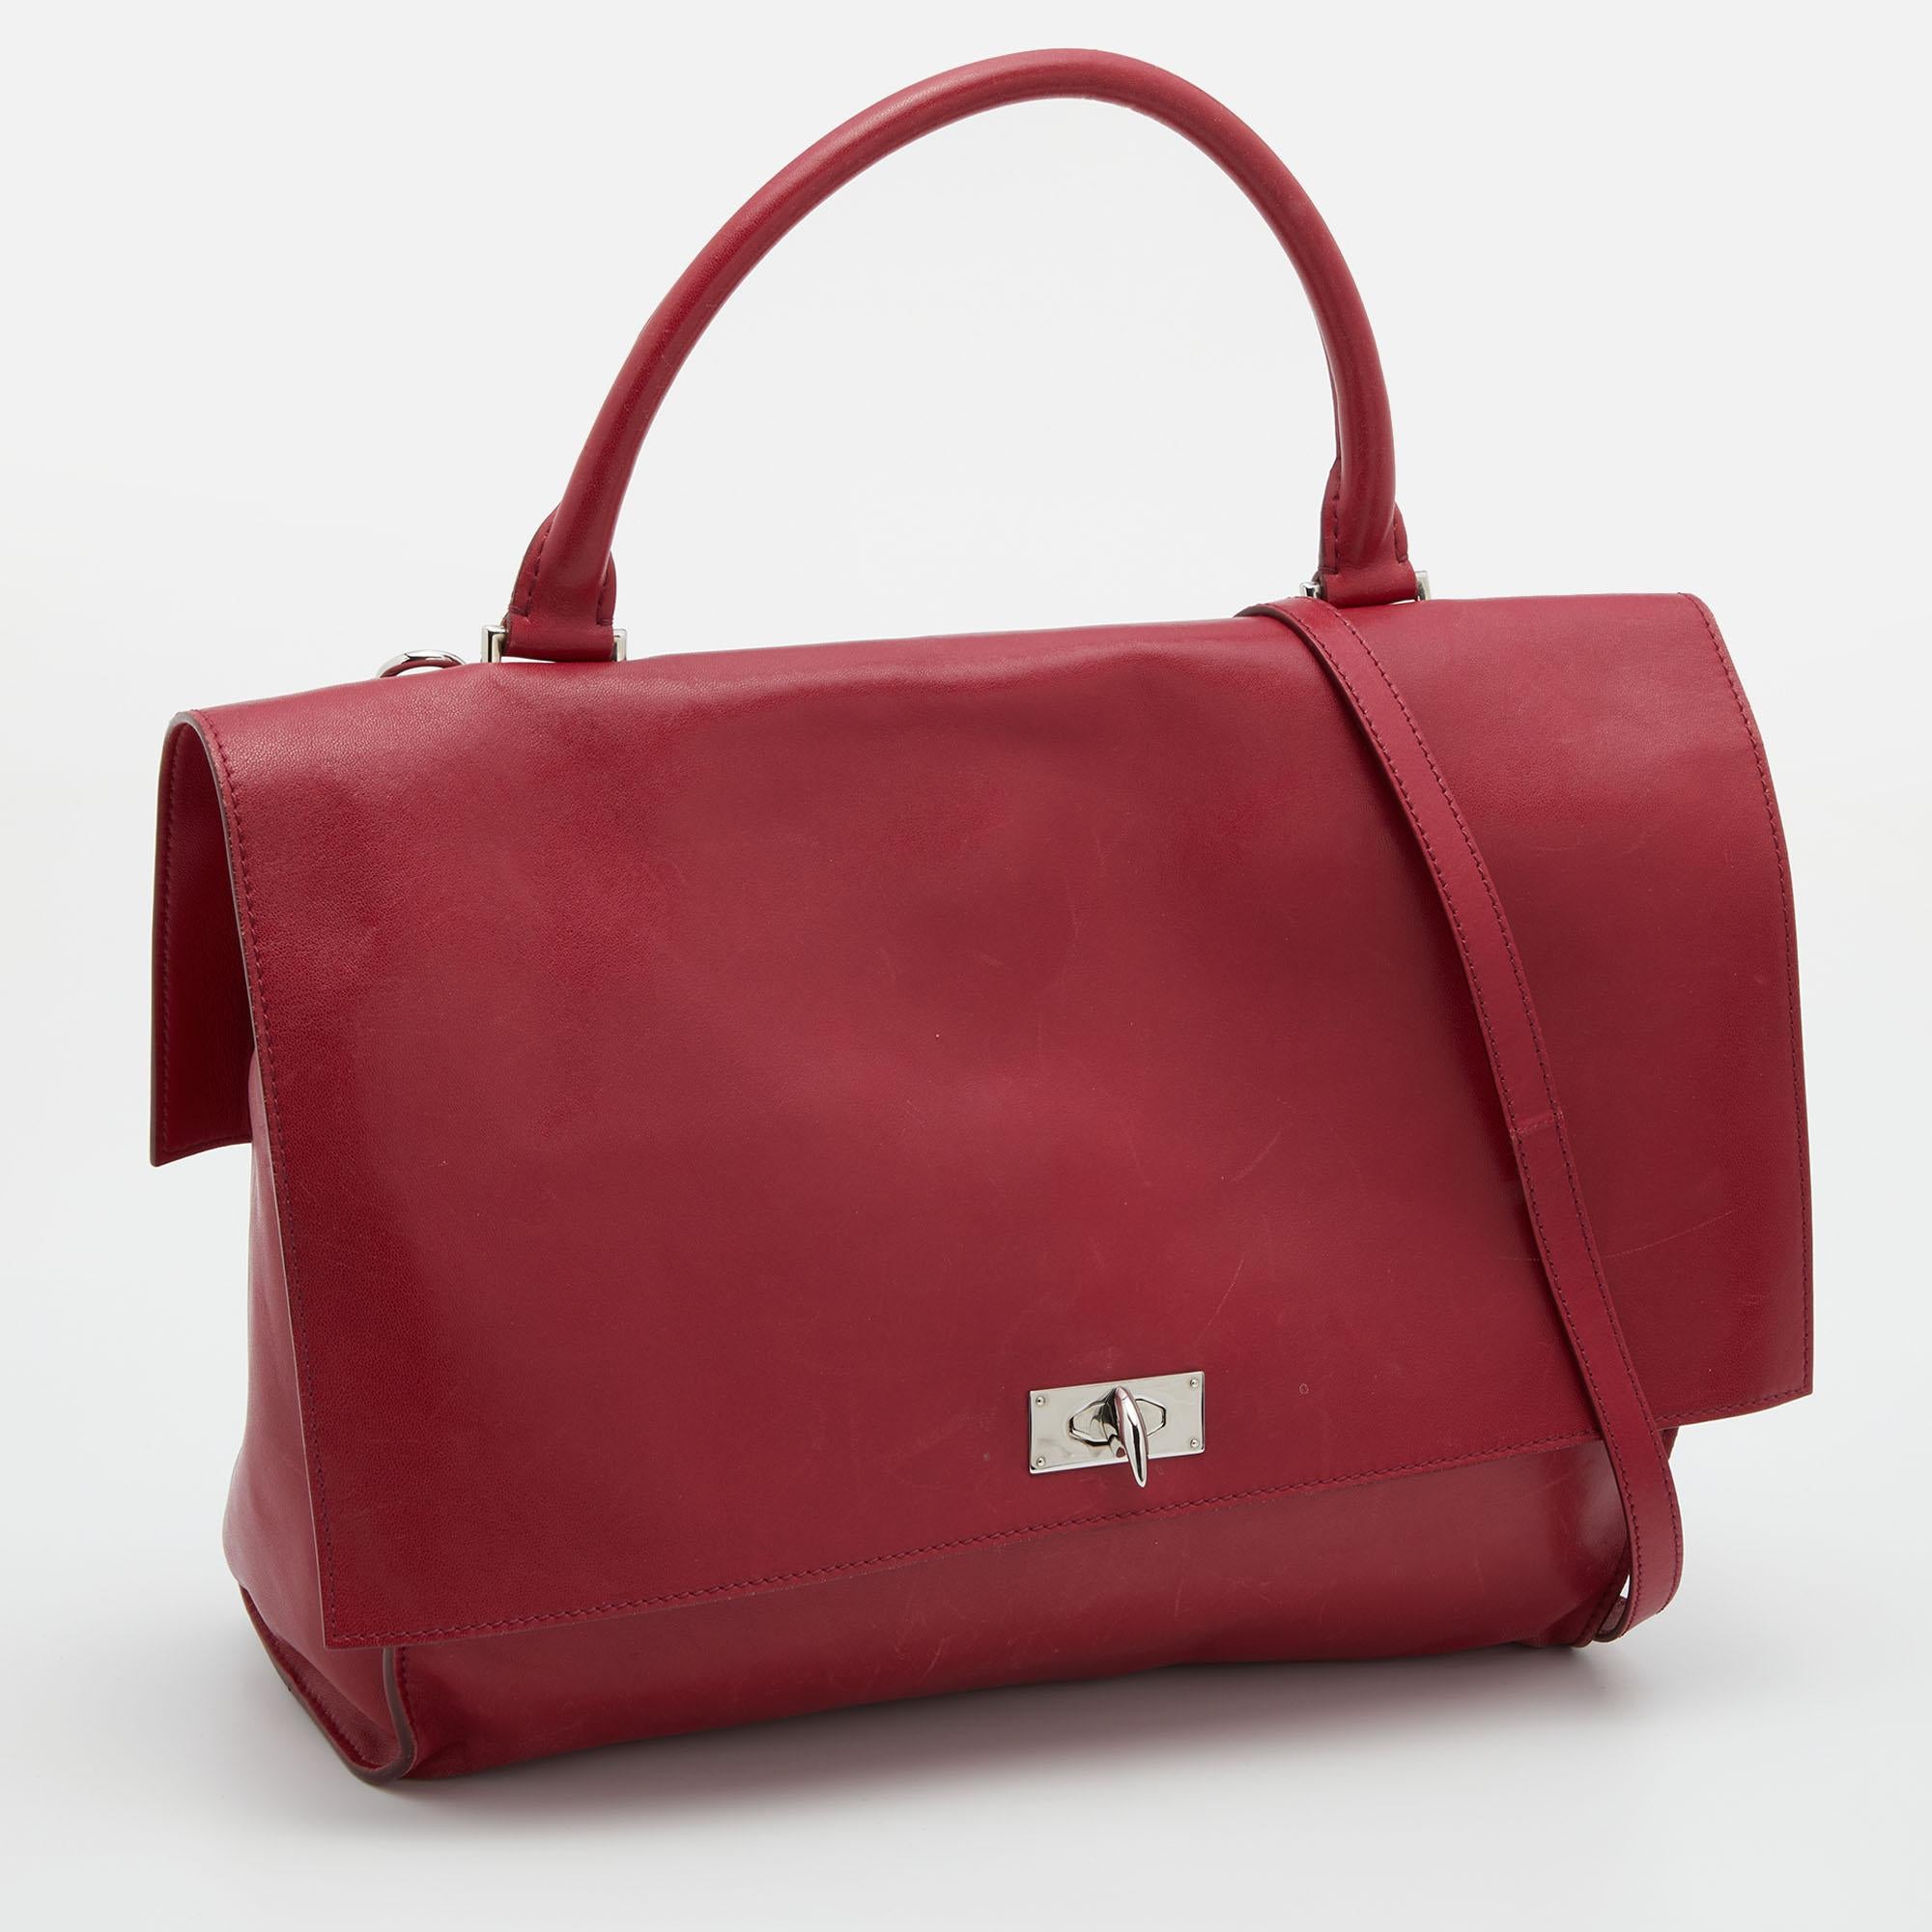 Women's Givenchy Red Leather Shark Tooth Top Handle Bag